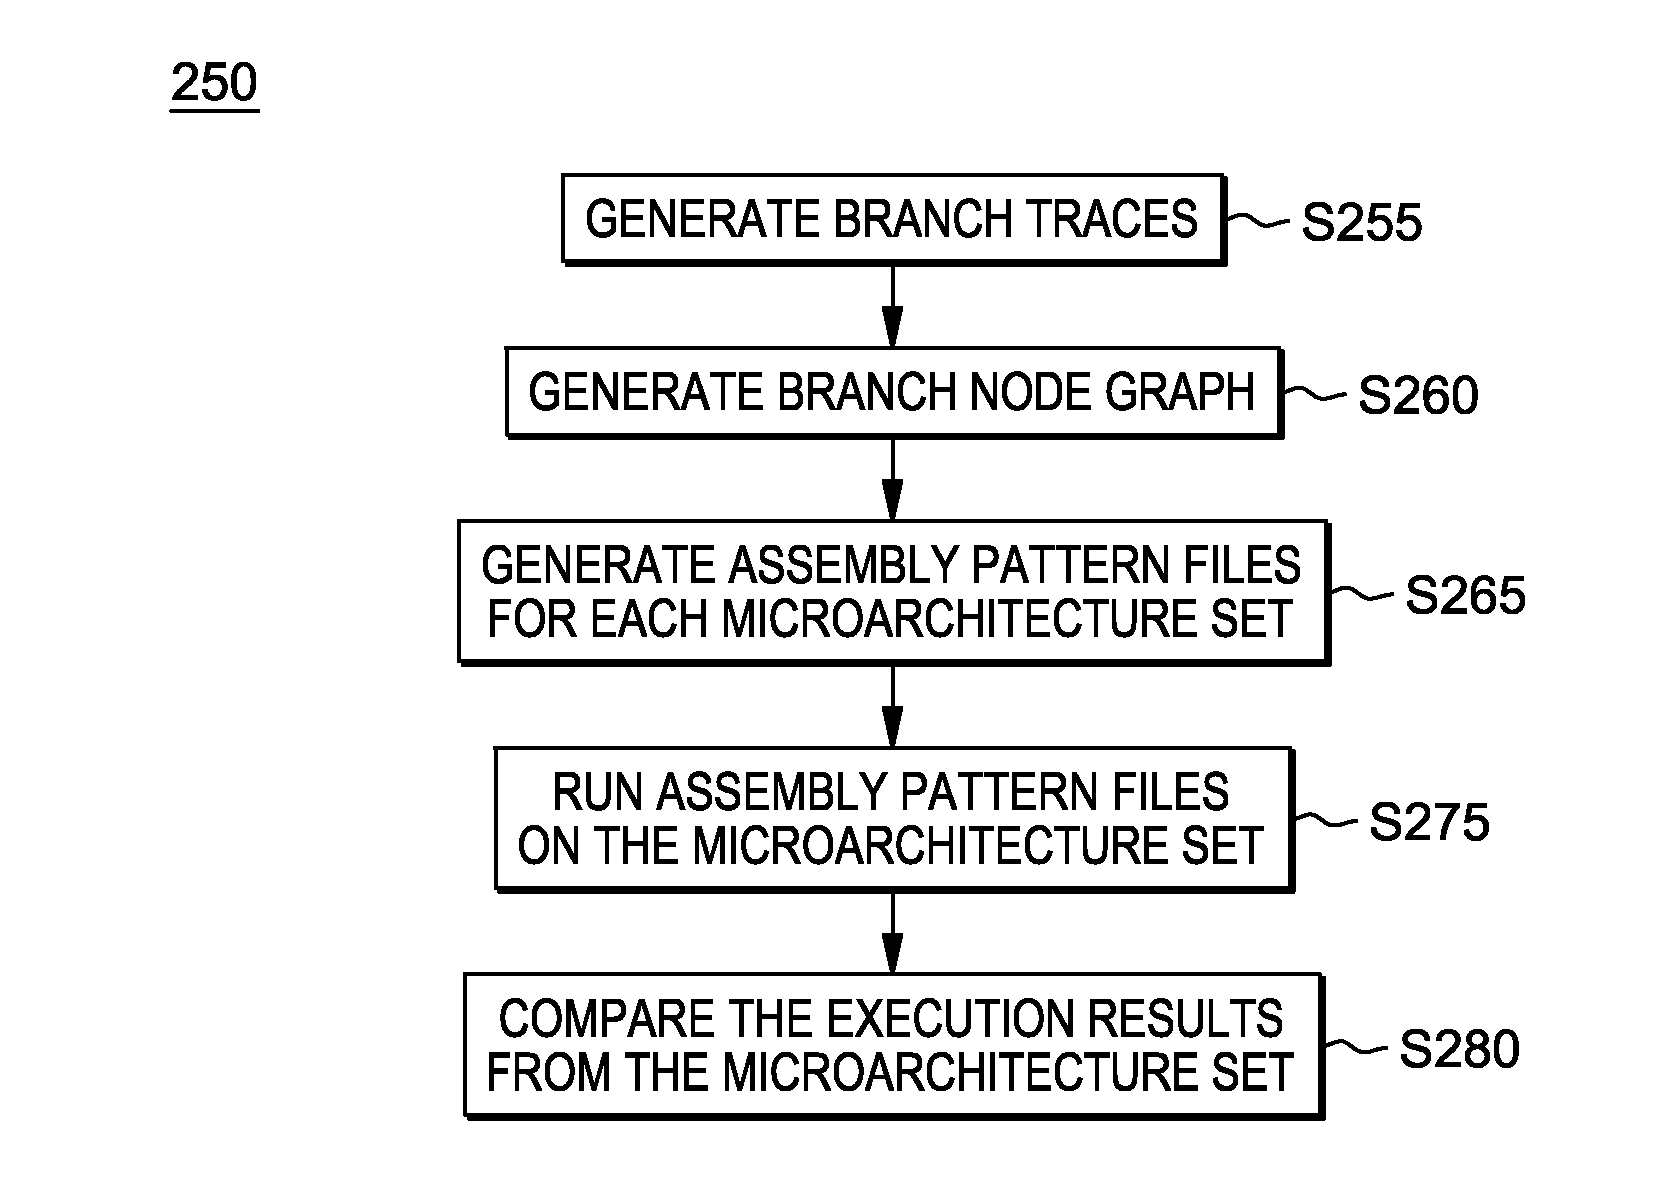 Branch synthetic generation across multiple microarchitecture generations